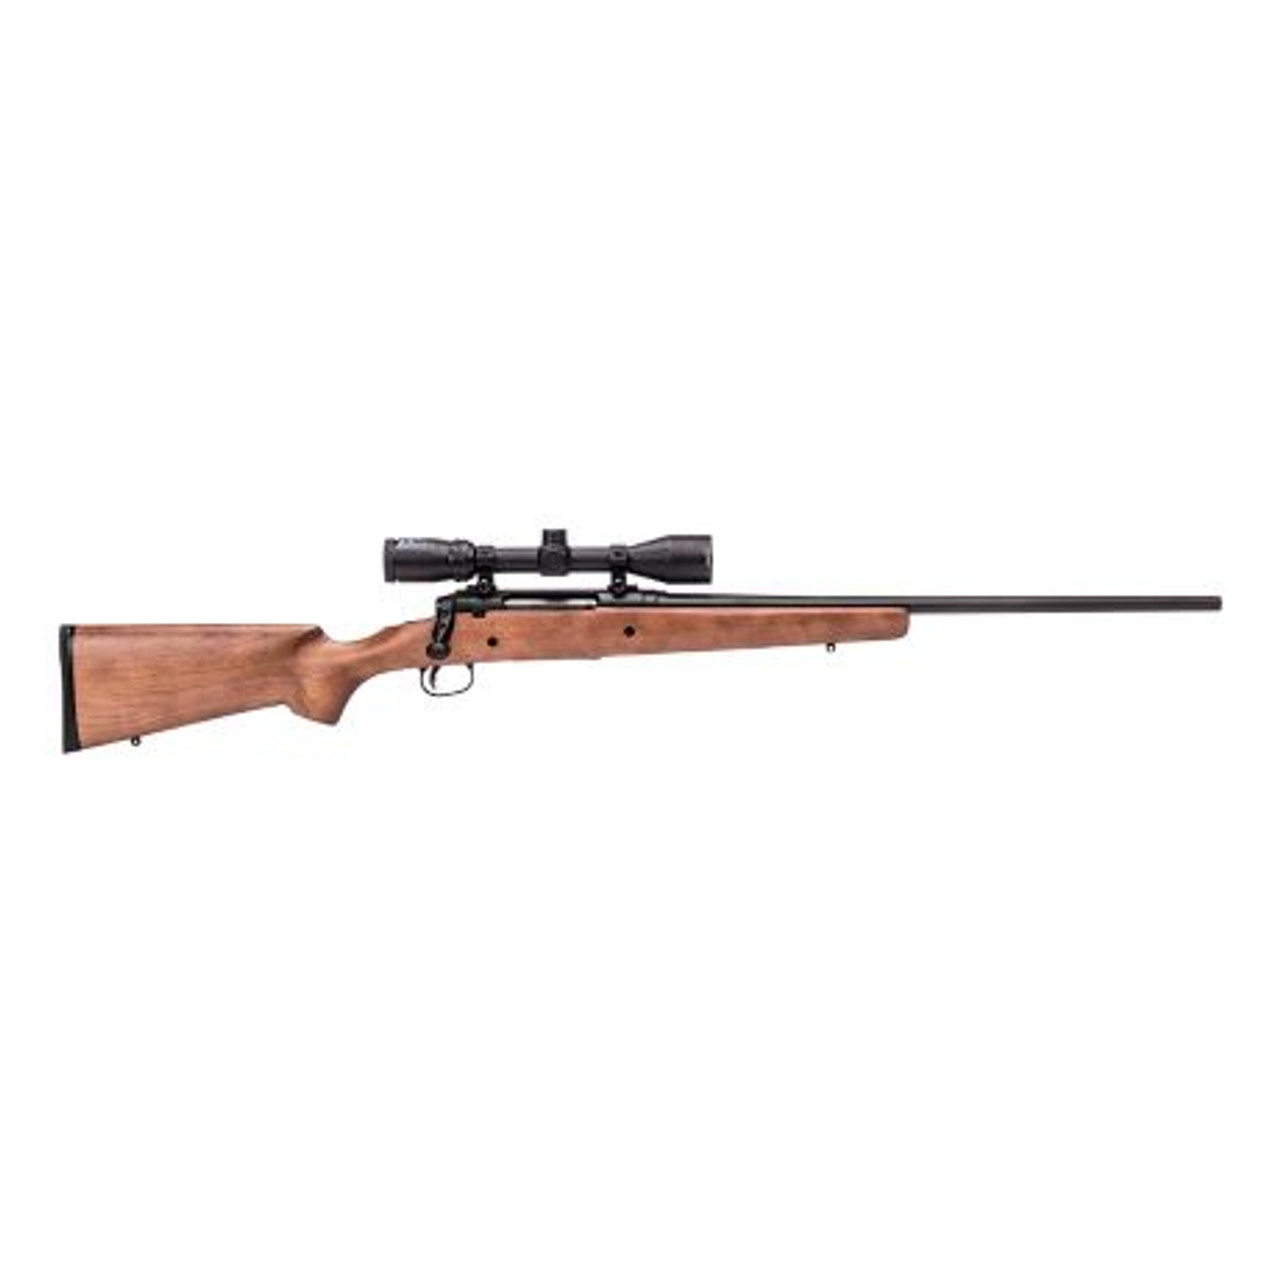 • Sleek, modern hardwood stock
• Blued button-rifled barrel
• Includes factory-mounted bore-sighted Bushnell 3-9x40mm scope
• Includes detachable 4-round box magazine

The AXIS II XP Hardwood is a blend of affordable accuracy and classic style. The package rifle maximizes any user's precision with the adjustable AccuTrigger™ system, button rifling, and a factory-mounted and bore-sighted Bushnell® 3-9x40mm scope.



Calibre	Barrel
Length	Overall
Length	Magazine
Capacity	Rate
of Twist	Weight
.243
Winchester	22"	43.875"	4	1 in 9-1/4"	8.08 lb.
